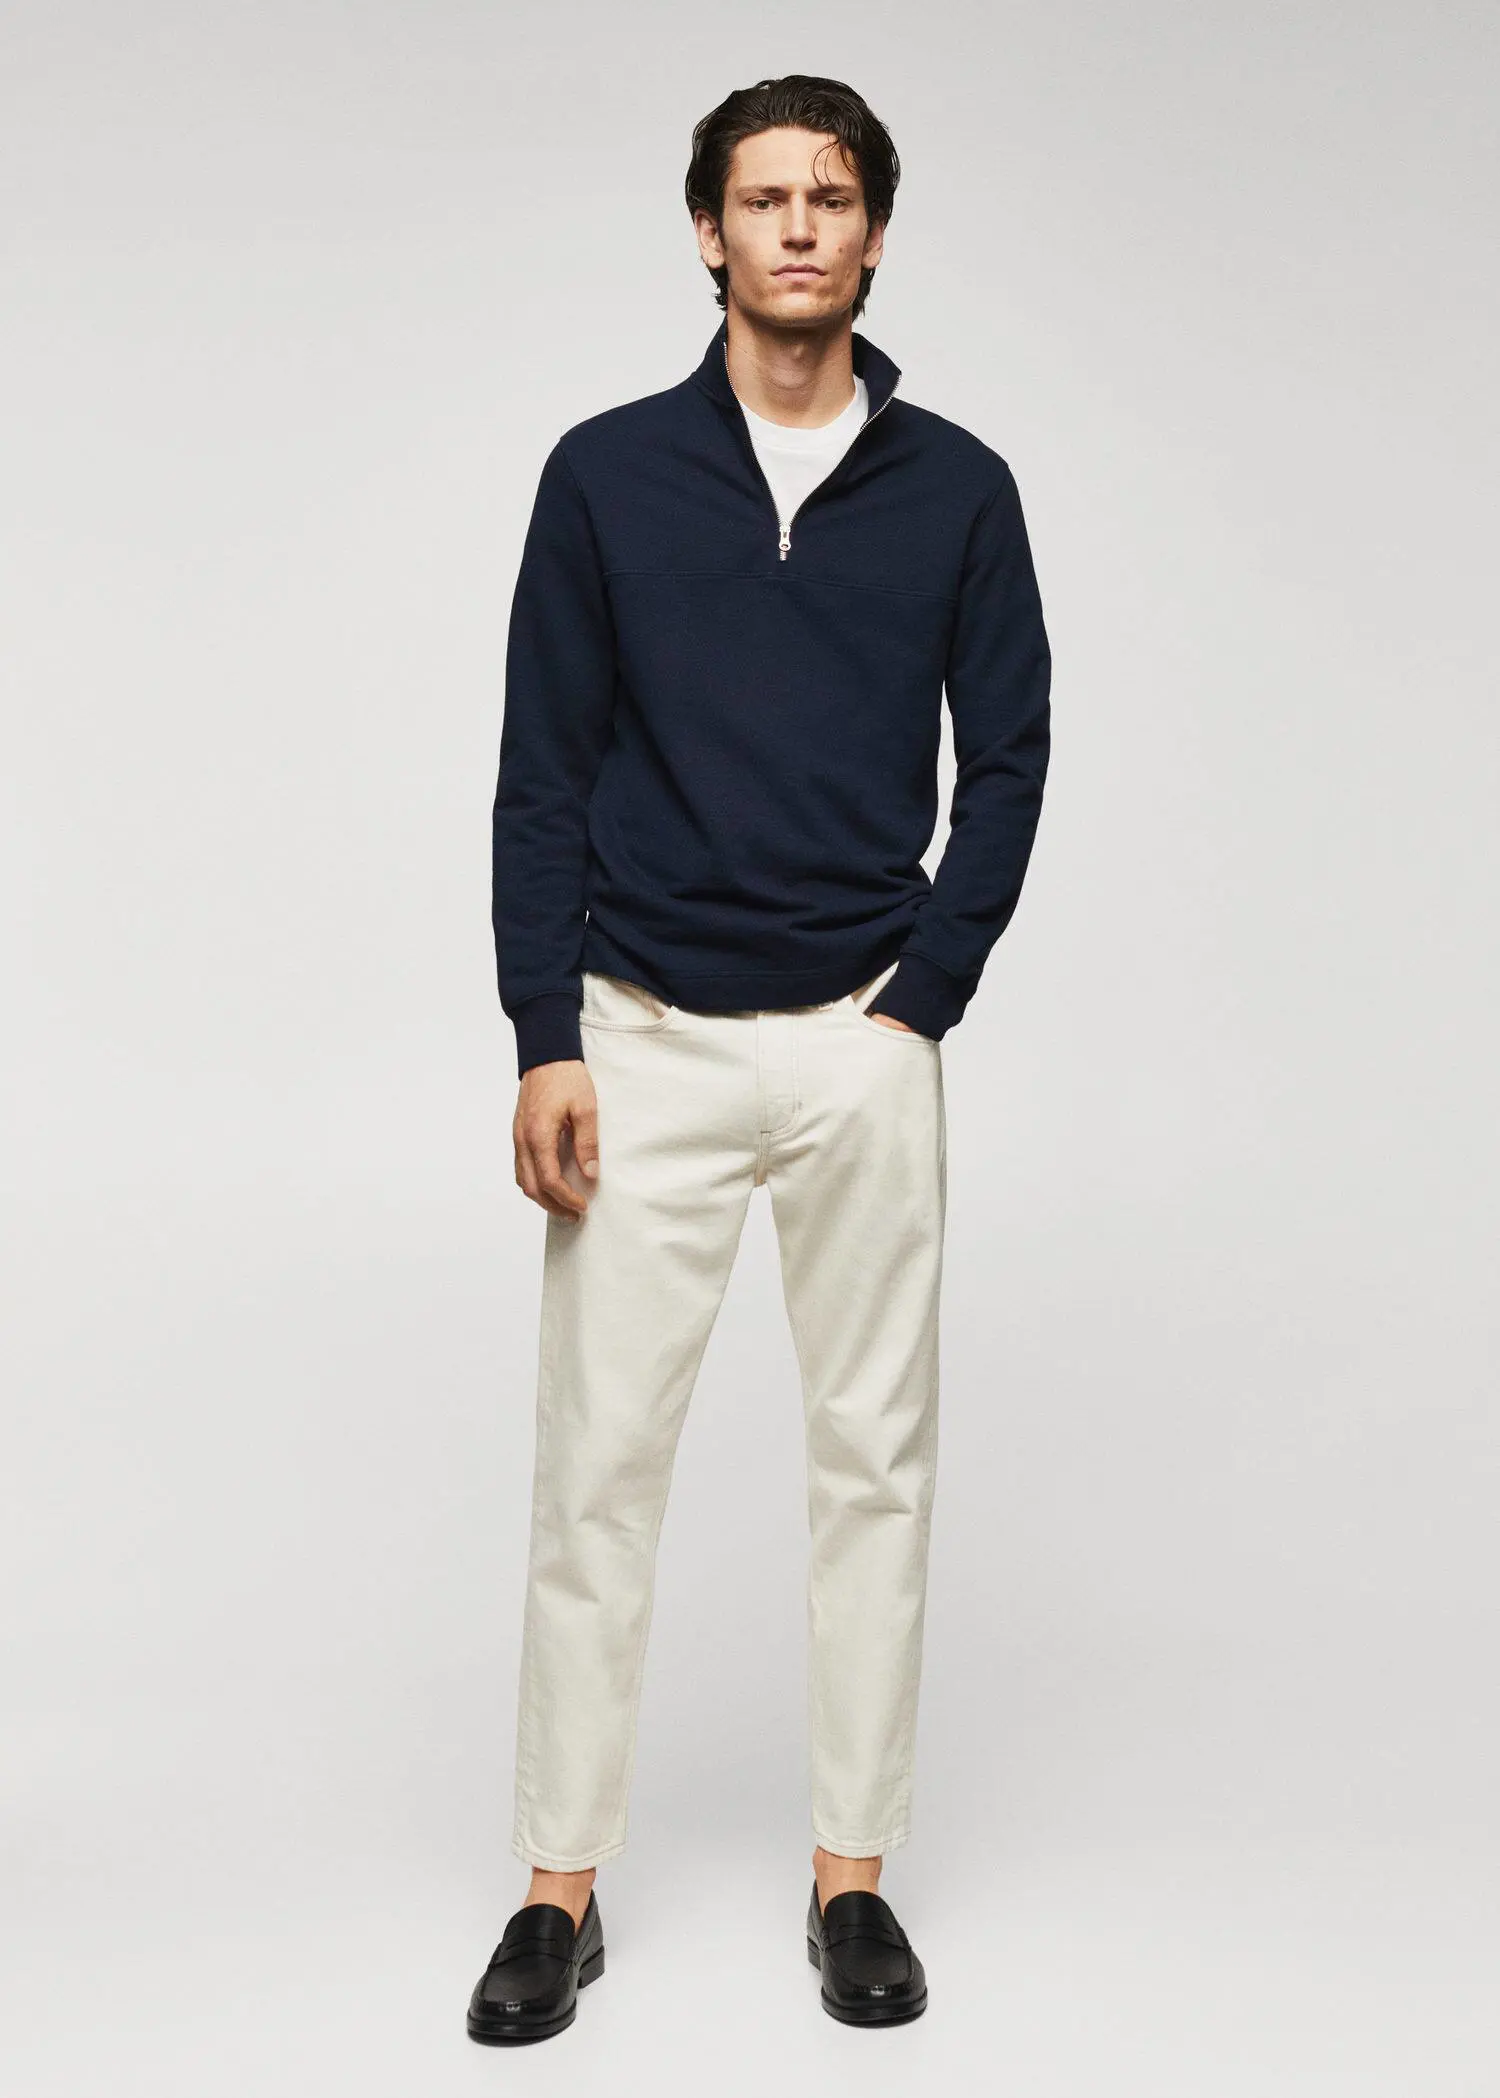 Mango Cotton sweatshirt with zip neck. a man in a navy blue sweater and white pants. 